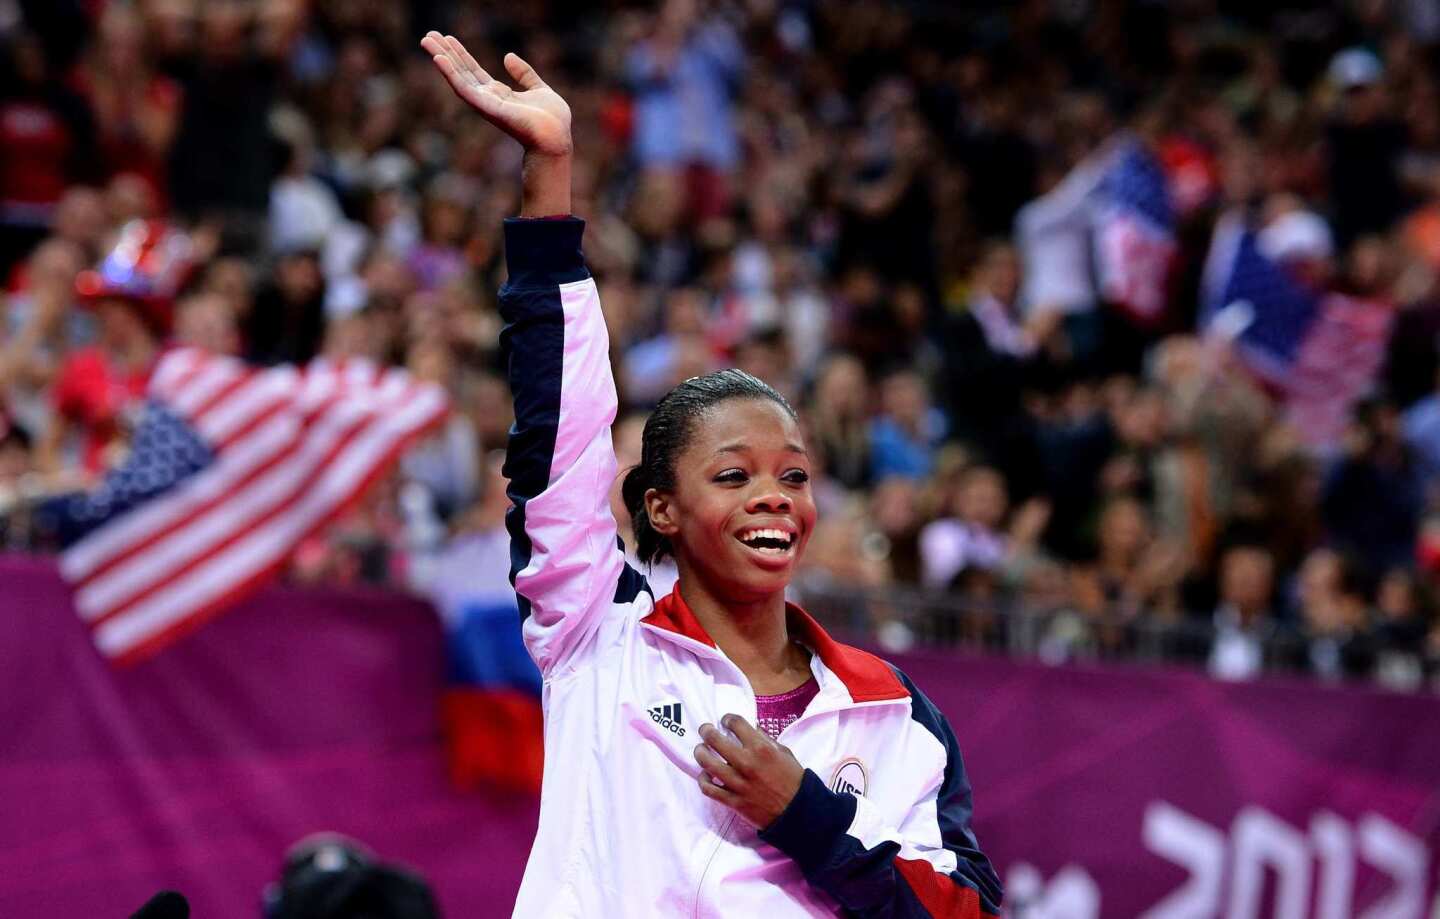 Gabrielle Douglas waves to the crowd after winning the gold medal in the women's individual all-around at the 2012 London Olympics.